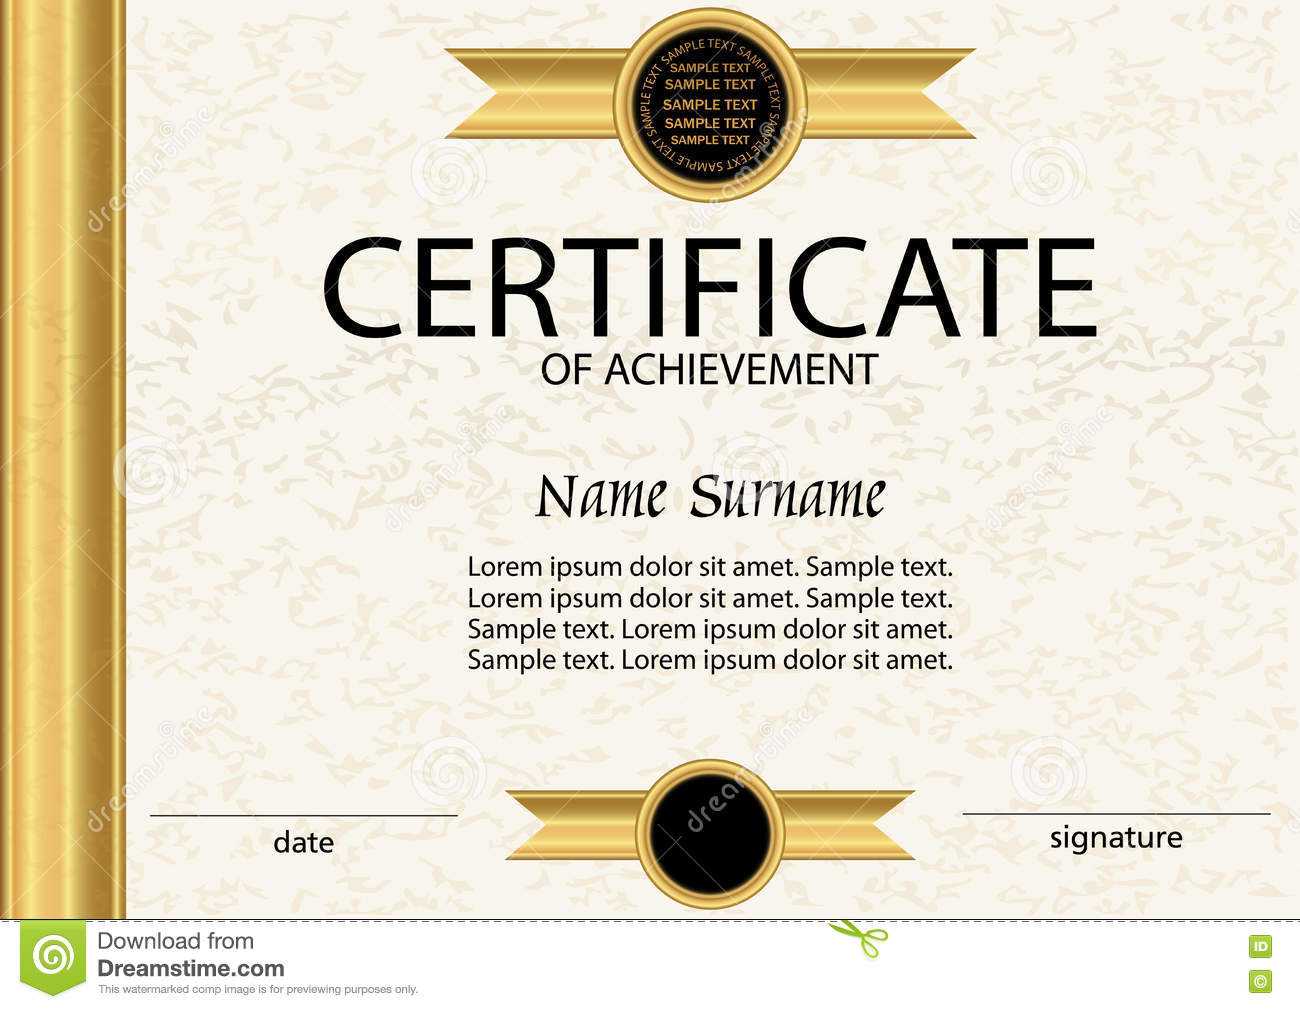 Certificate Of Achievement Or Diploma Template. Vector Stock Throughout Certificate Of Attainment Template